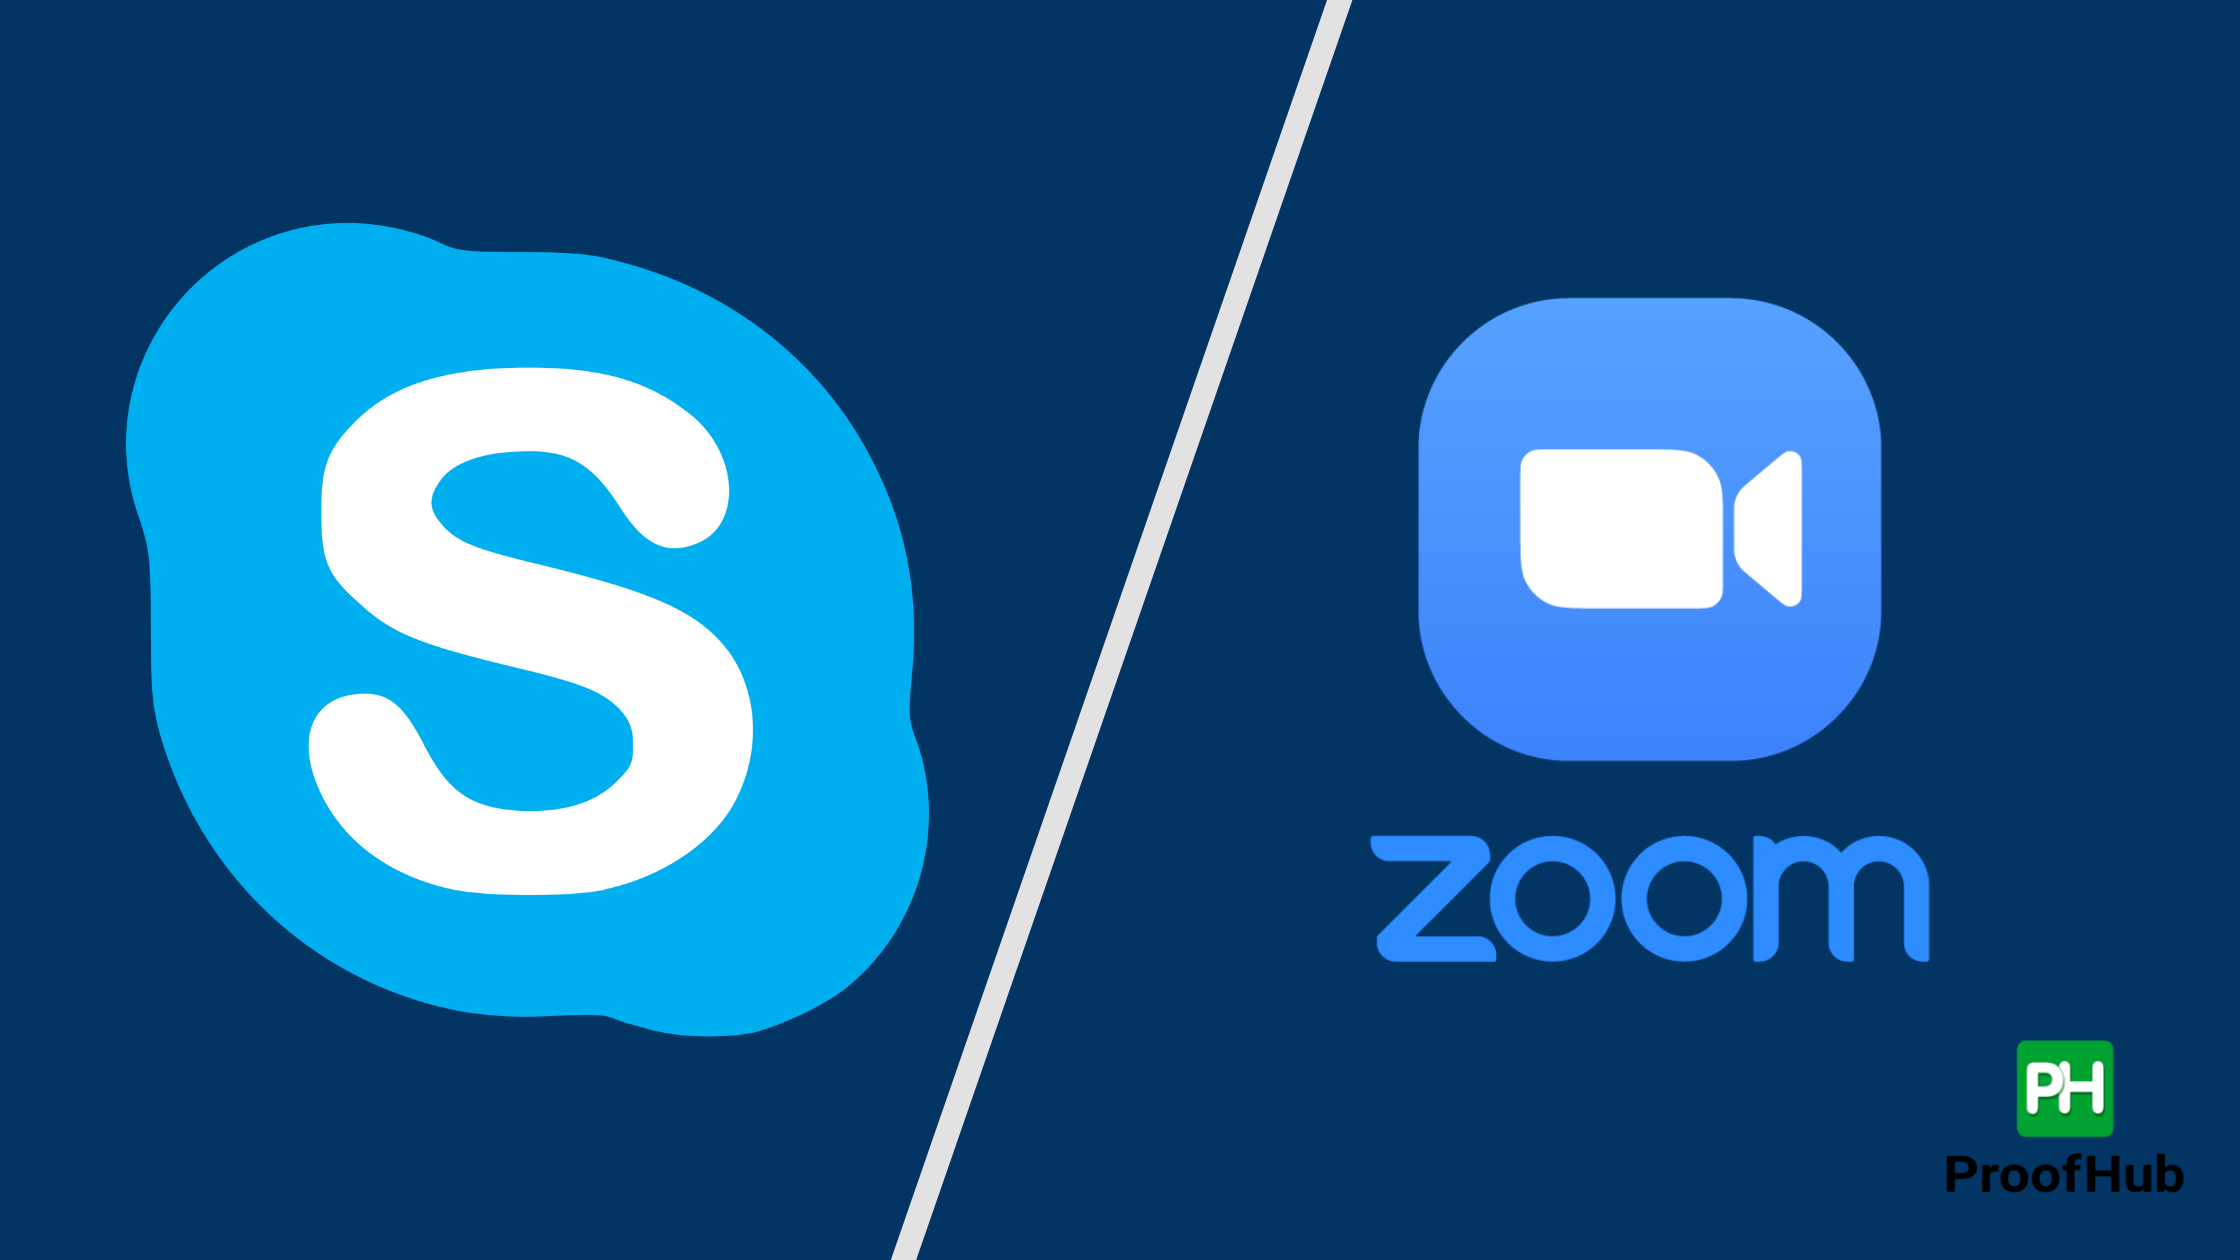 Zoom vs Skype: Which One is the Best For Team Communication